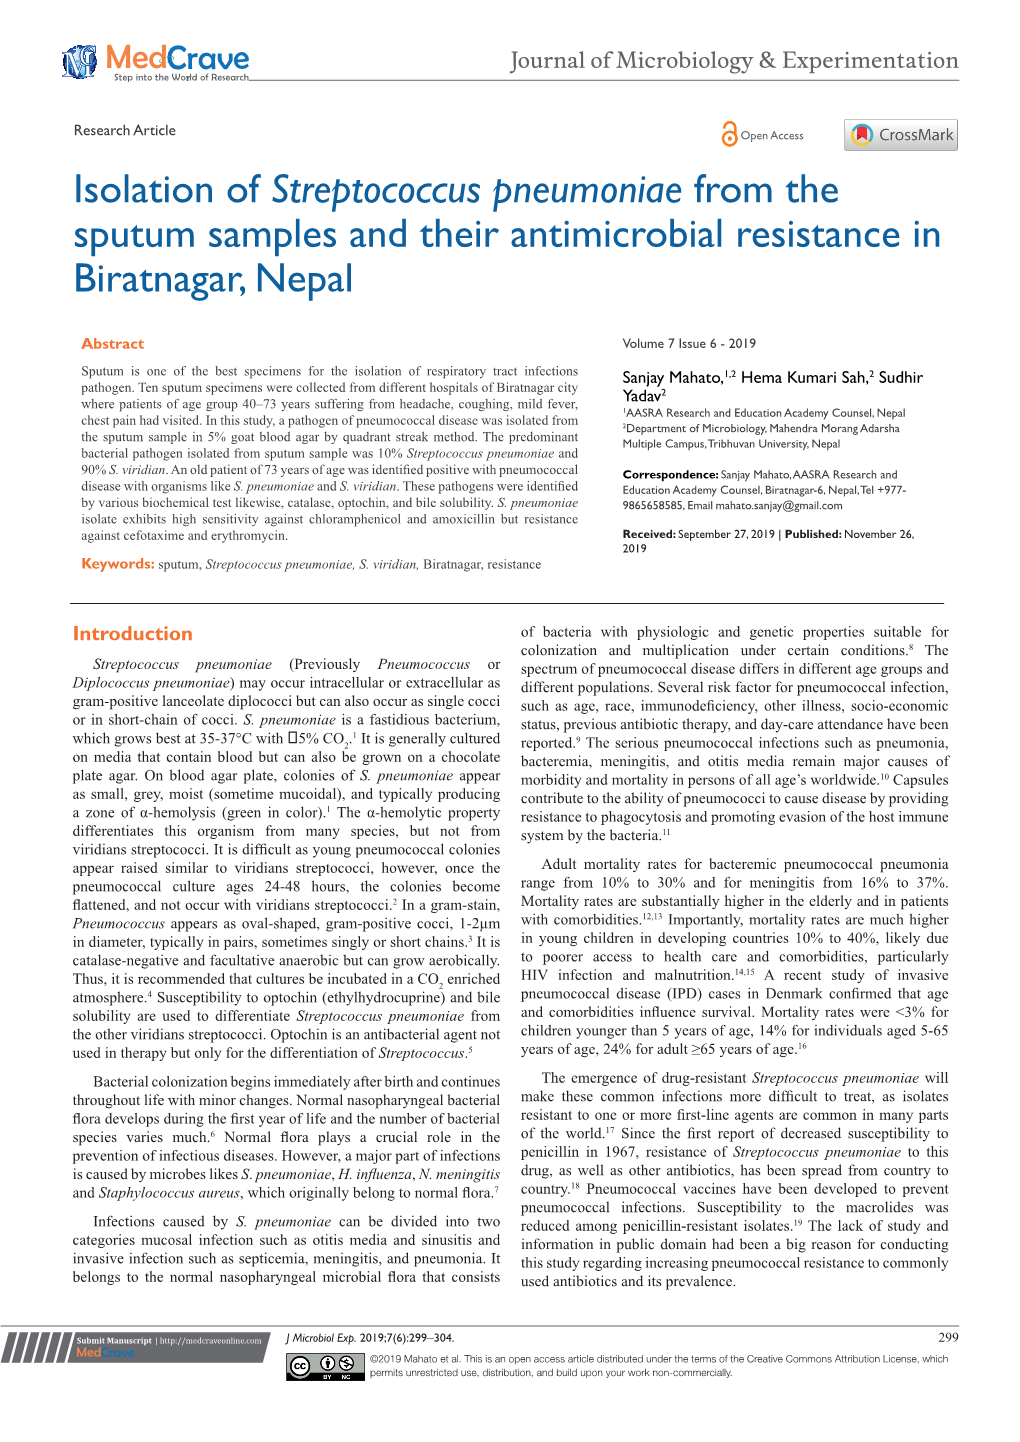 Isolation of Streptococcus Pneumoniae from the Sputum Samples and Their Antimicrobial Resistance in Biratnagar, Nepal